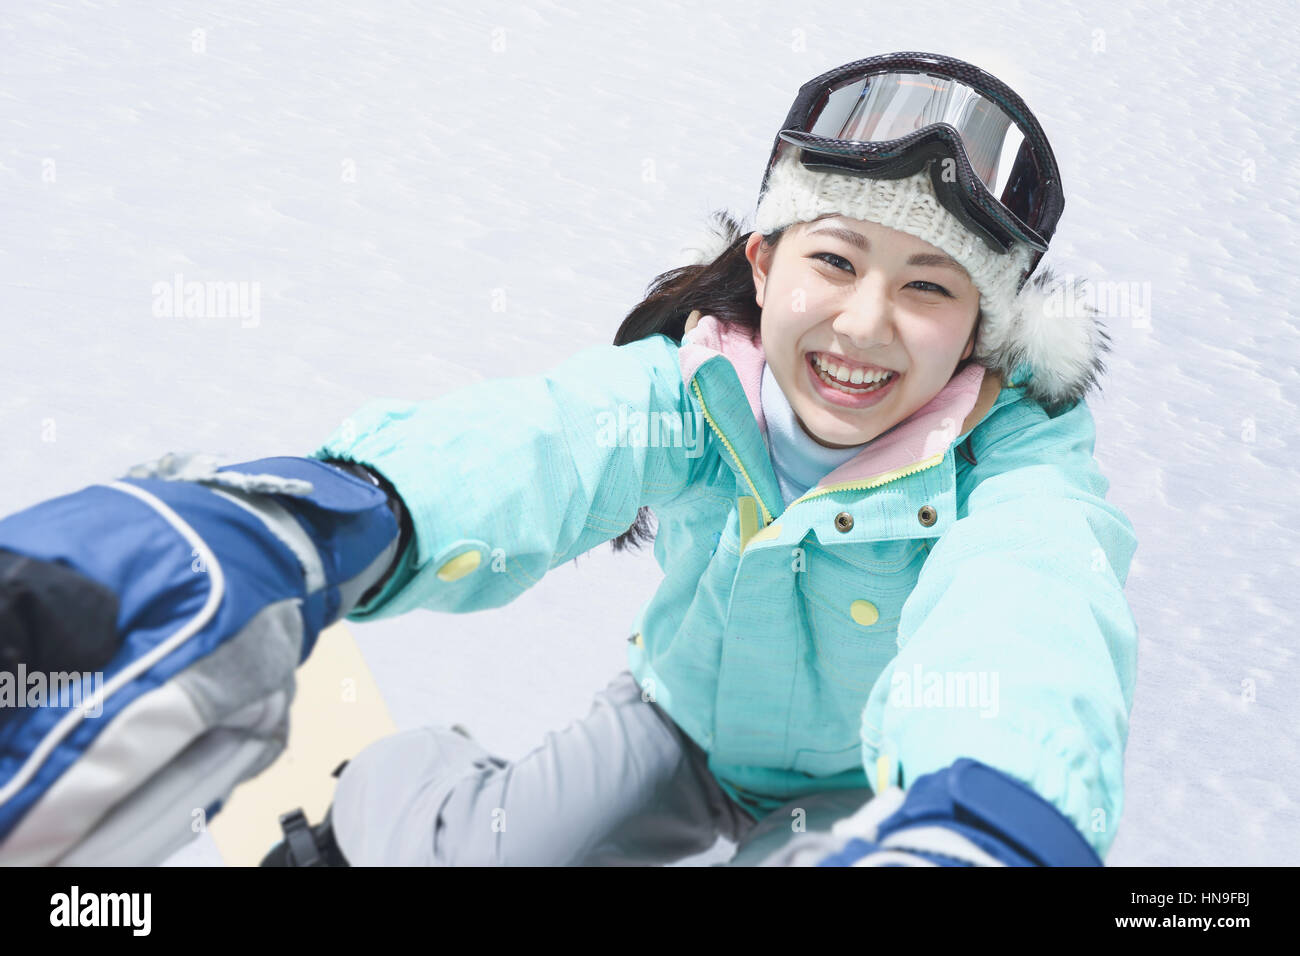 Young Japanese woman snowboarding Stock Photo